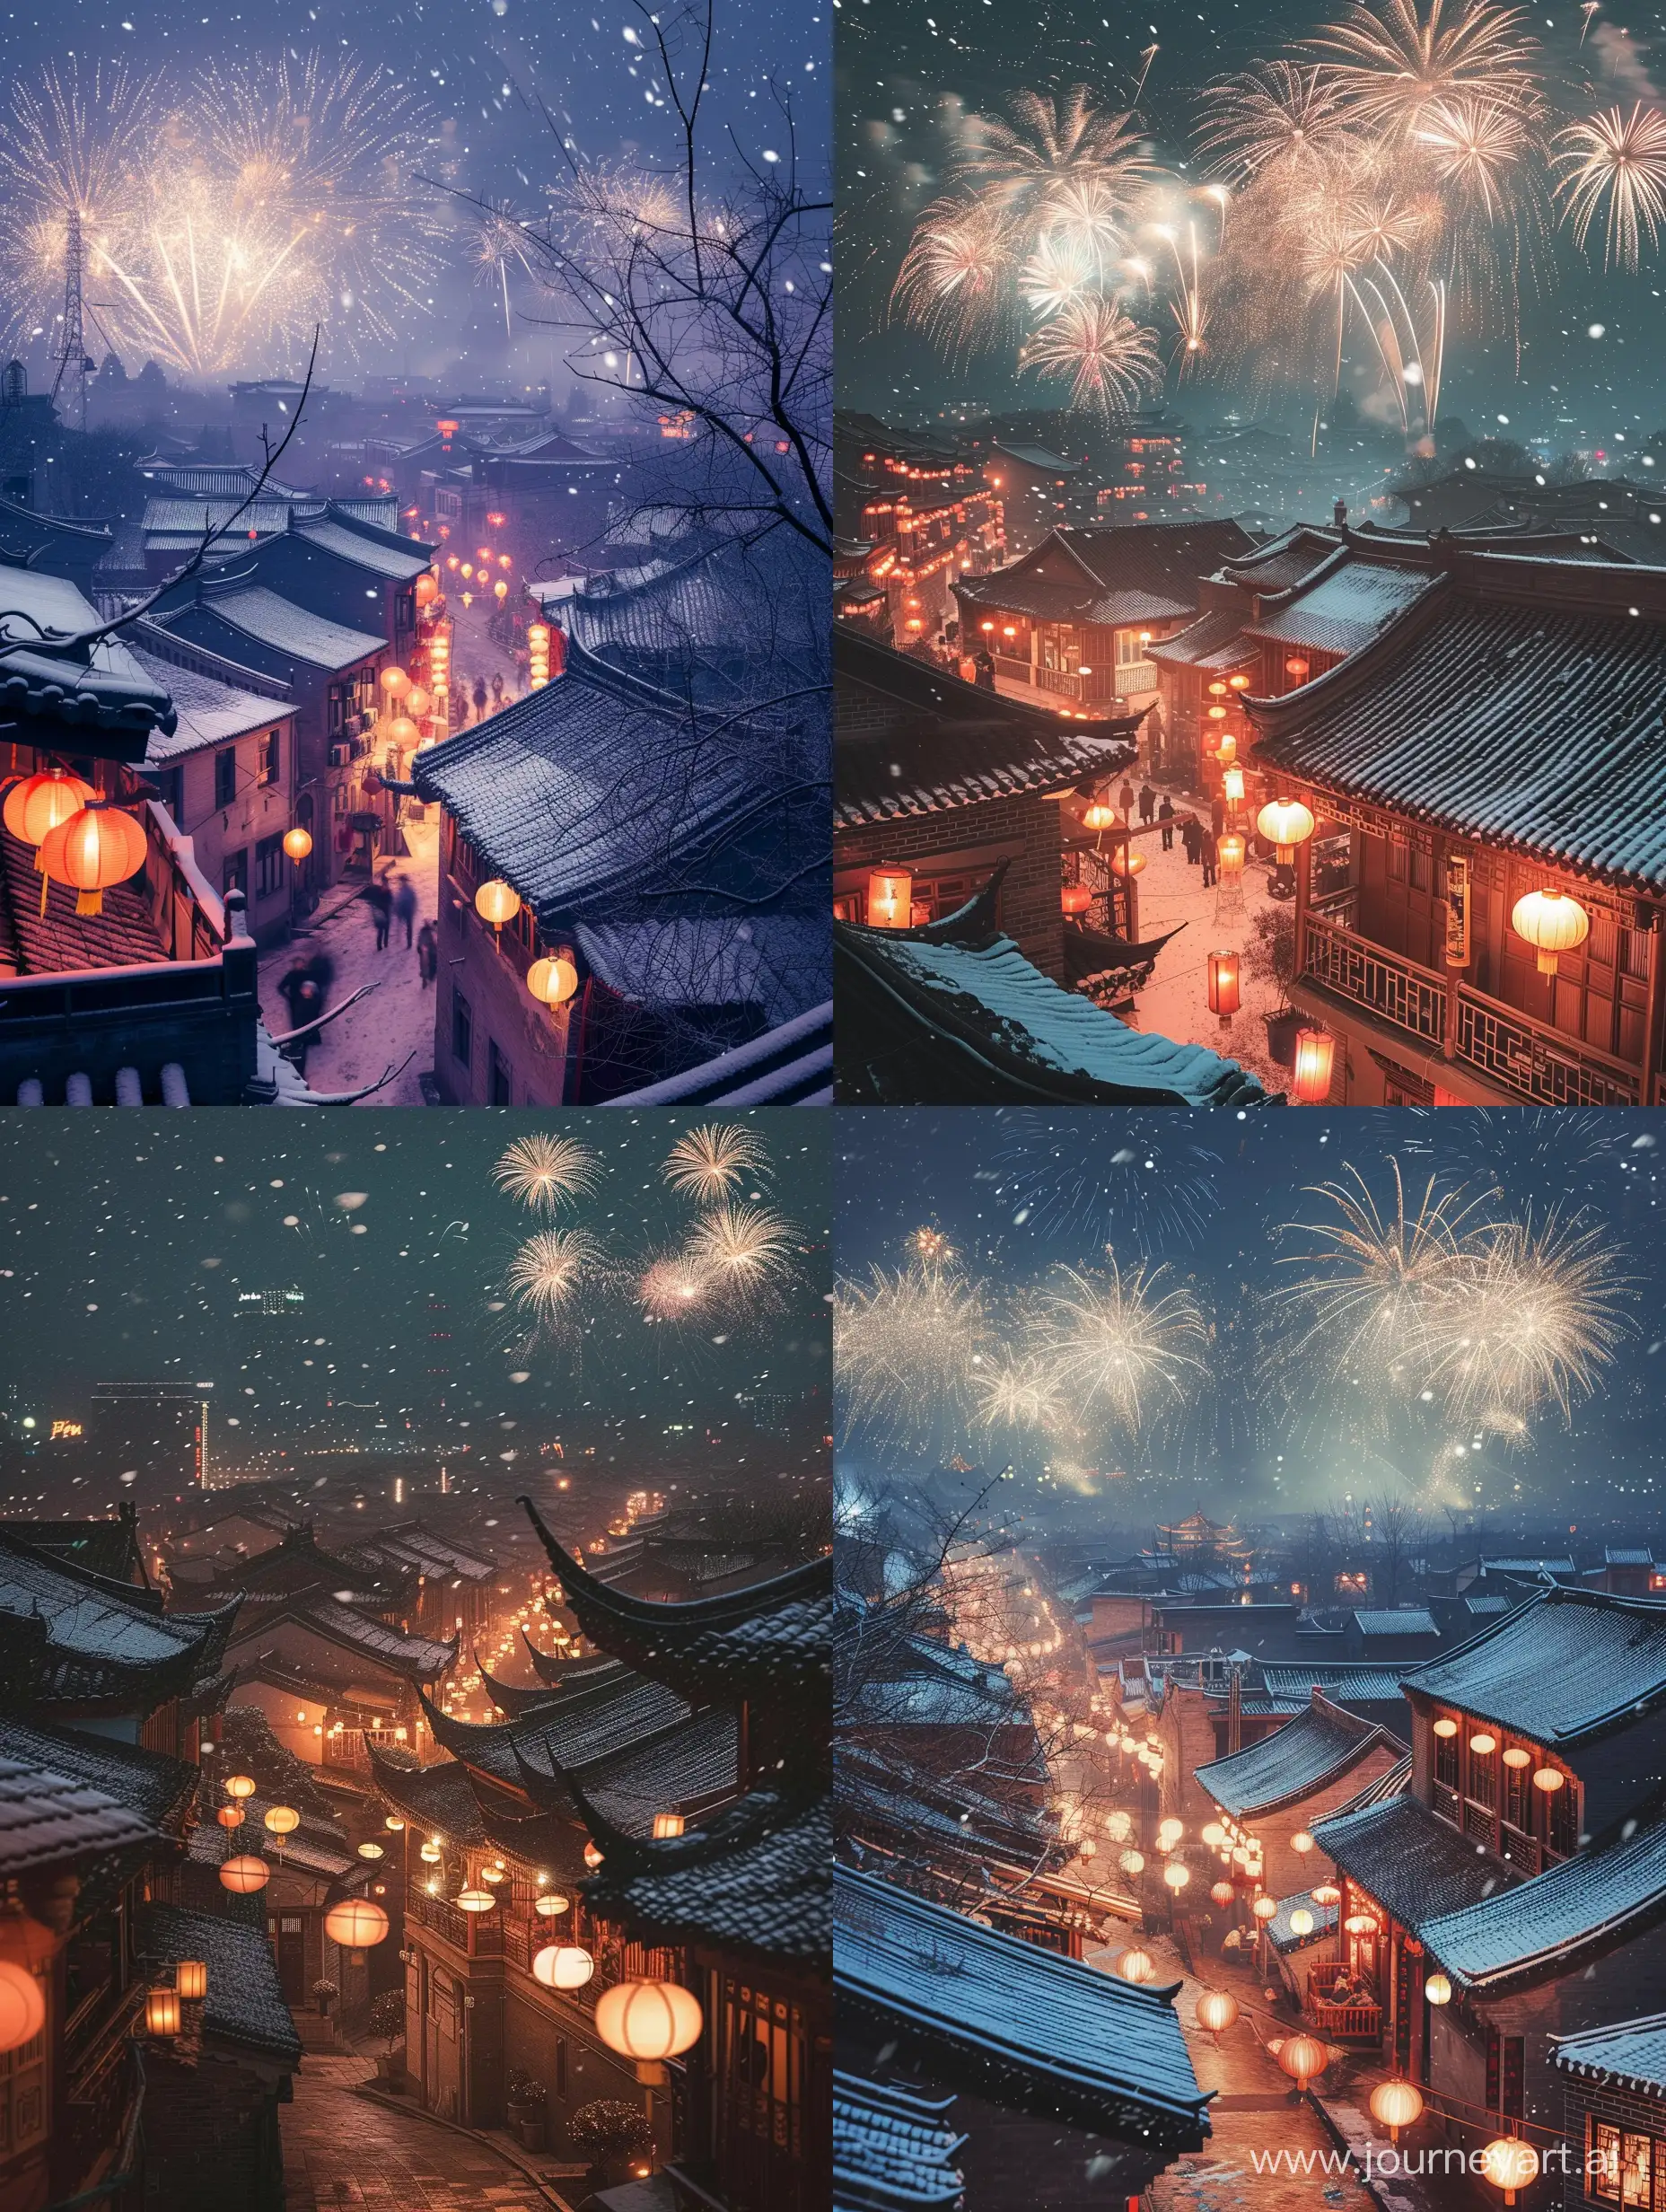 Vibrant-Chinese-New-Year-Night-Festive-Lanterns-and-Snowy-Rooftops